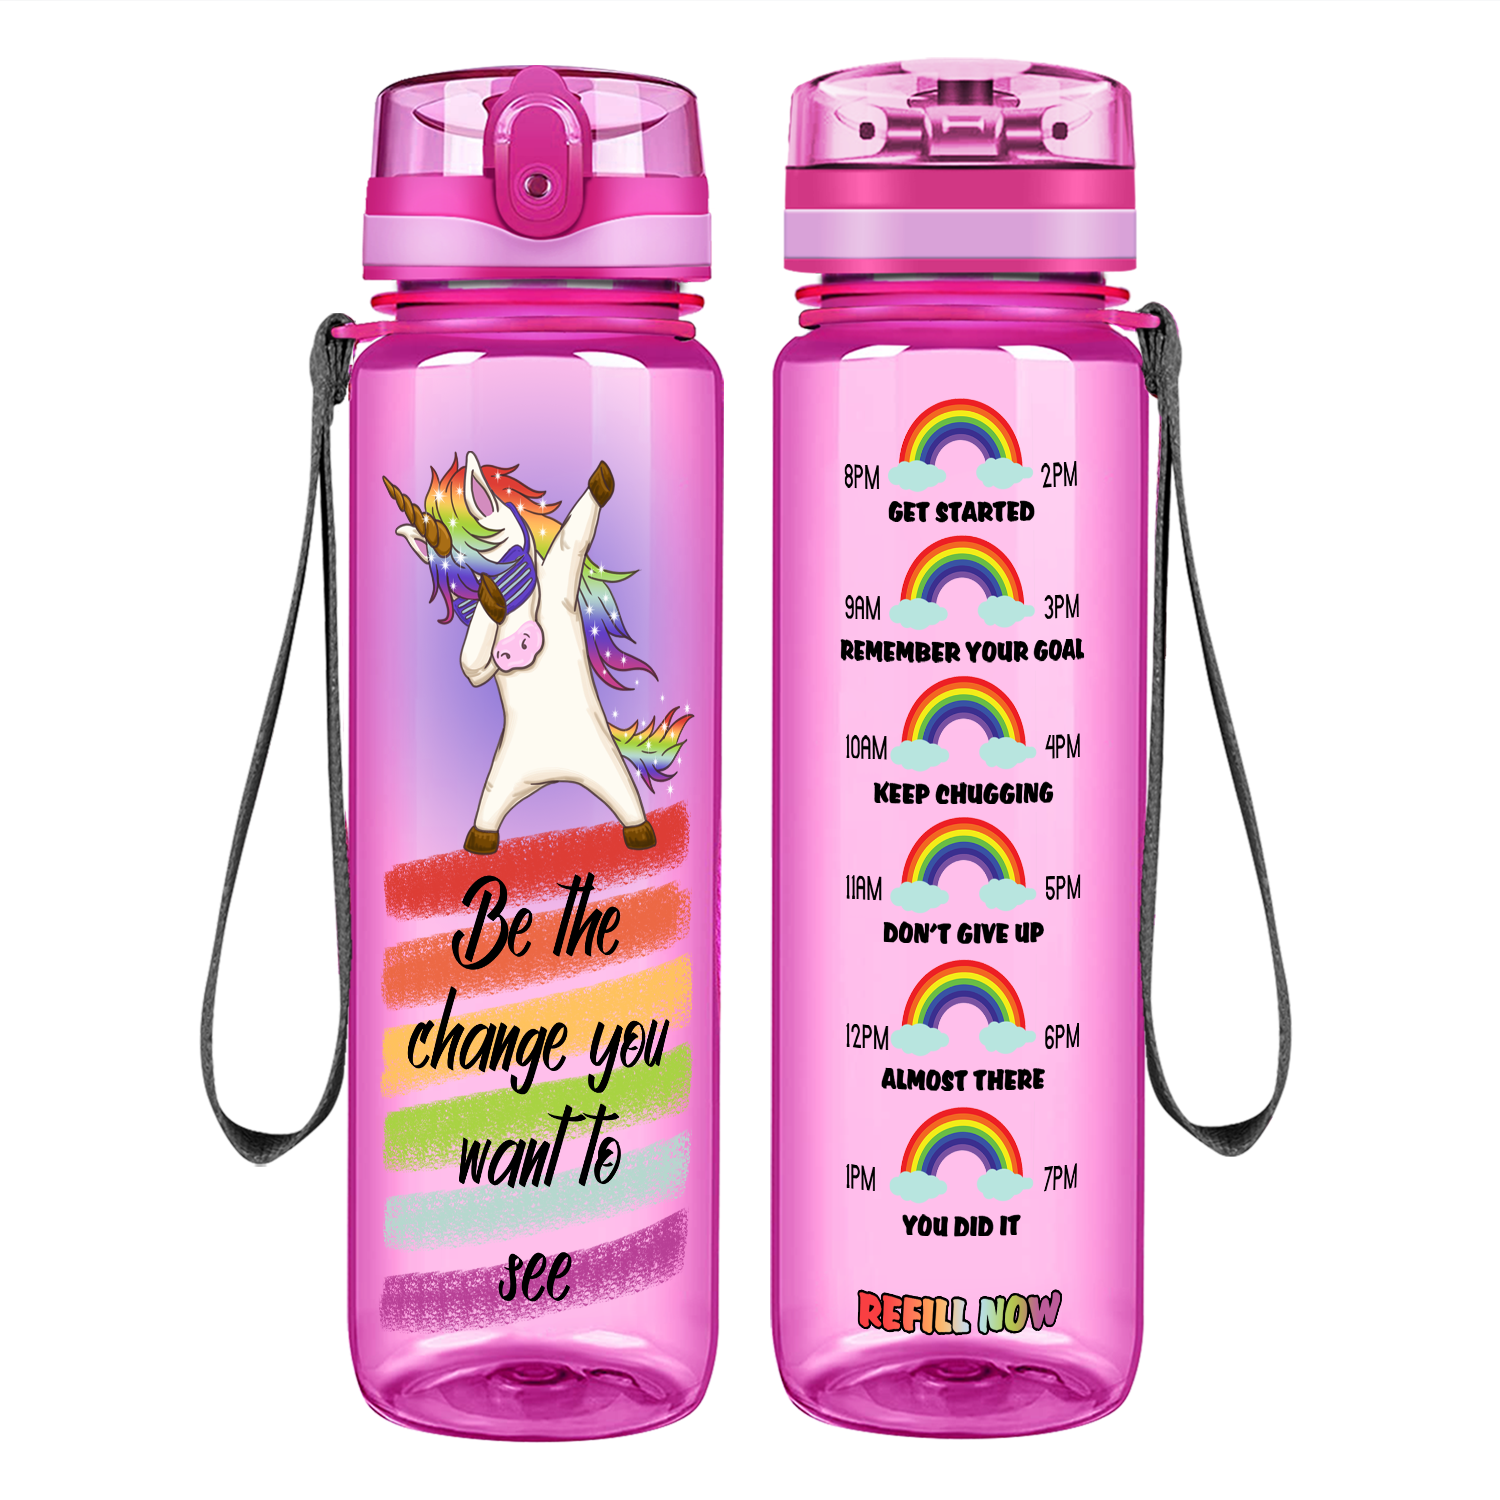 Be The Change You Want To See on 32 oz Motivational Tracking Water Bottle